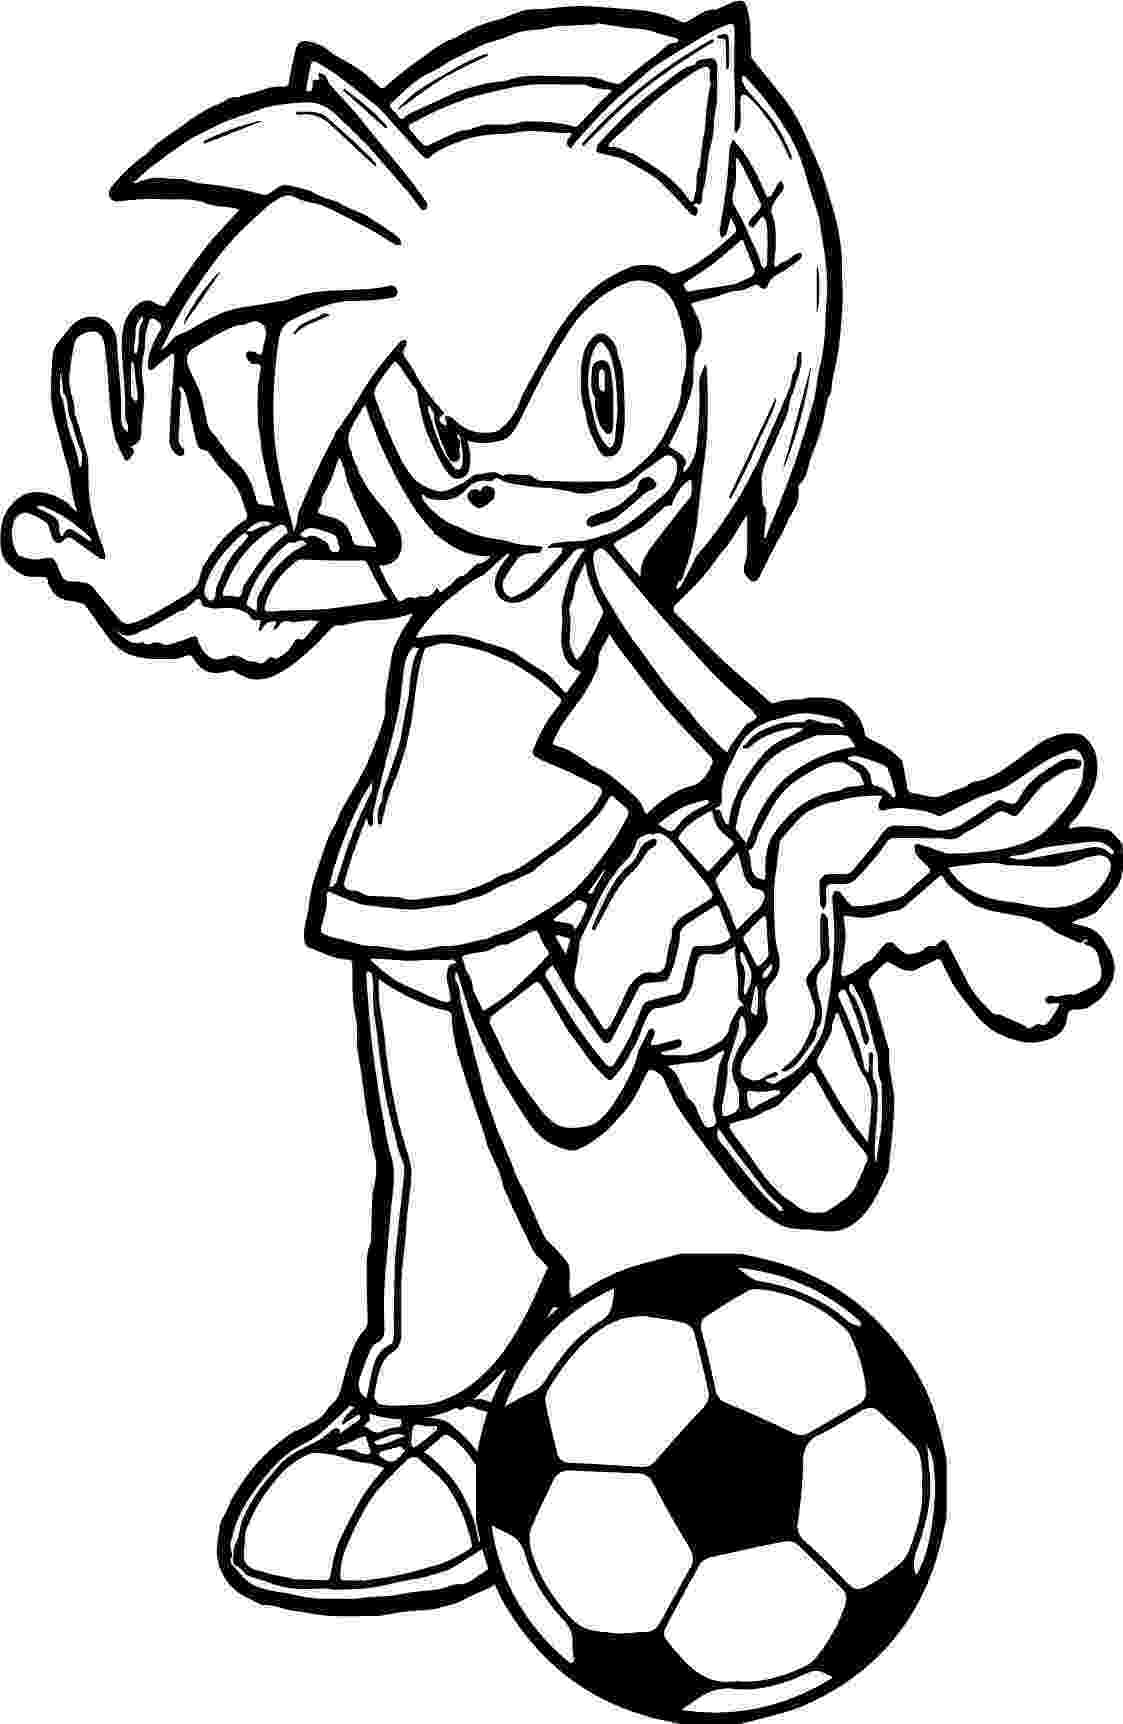 soccer coloring pages amy rose soccer ball kick coloring page wecoloringpagecom soccer coloring pages 